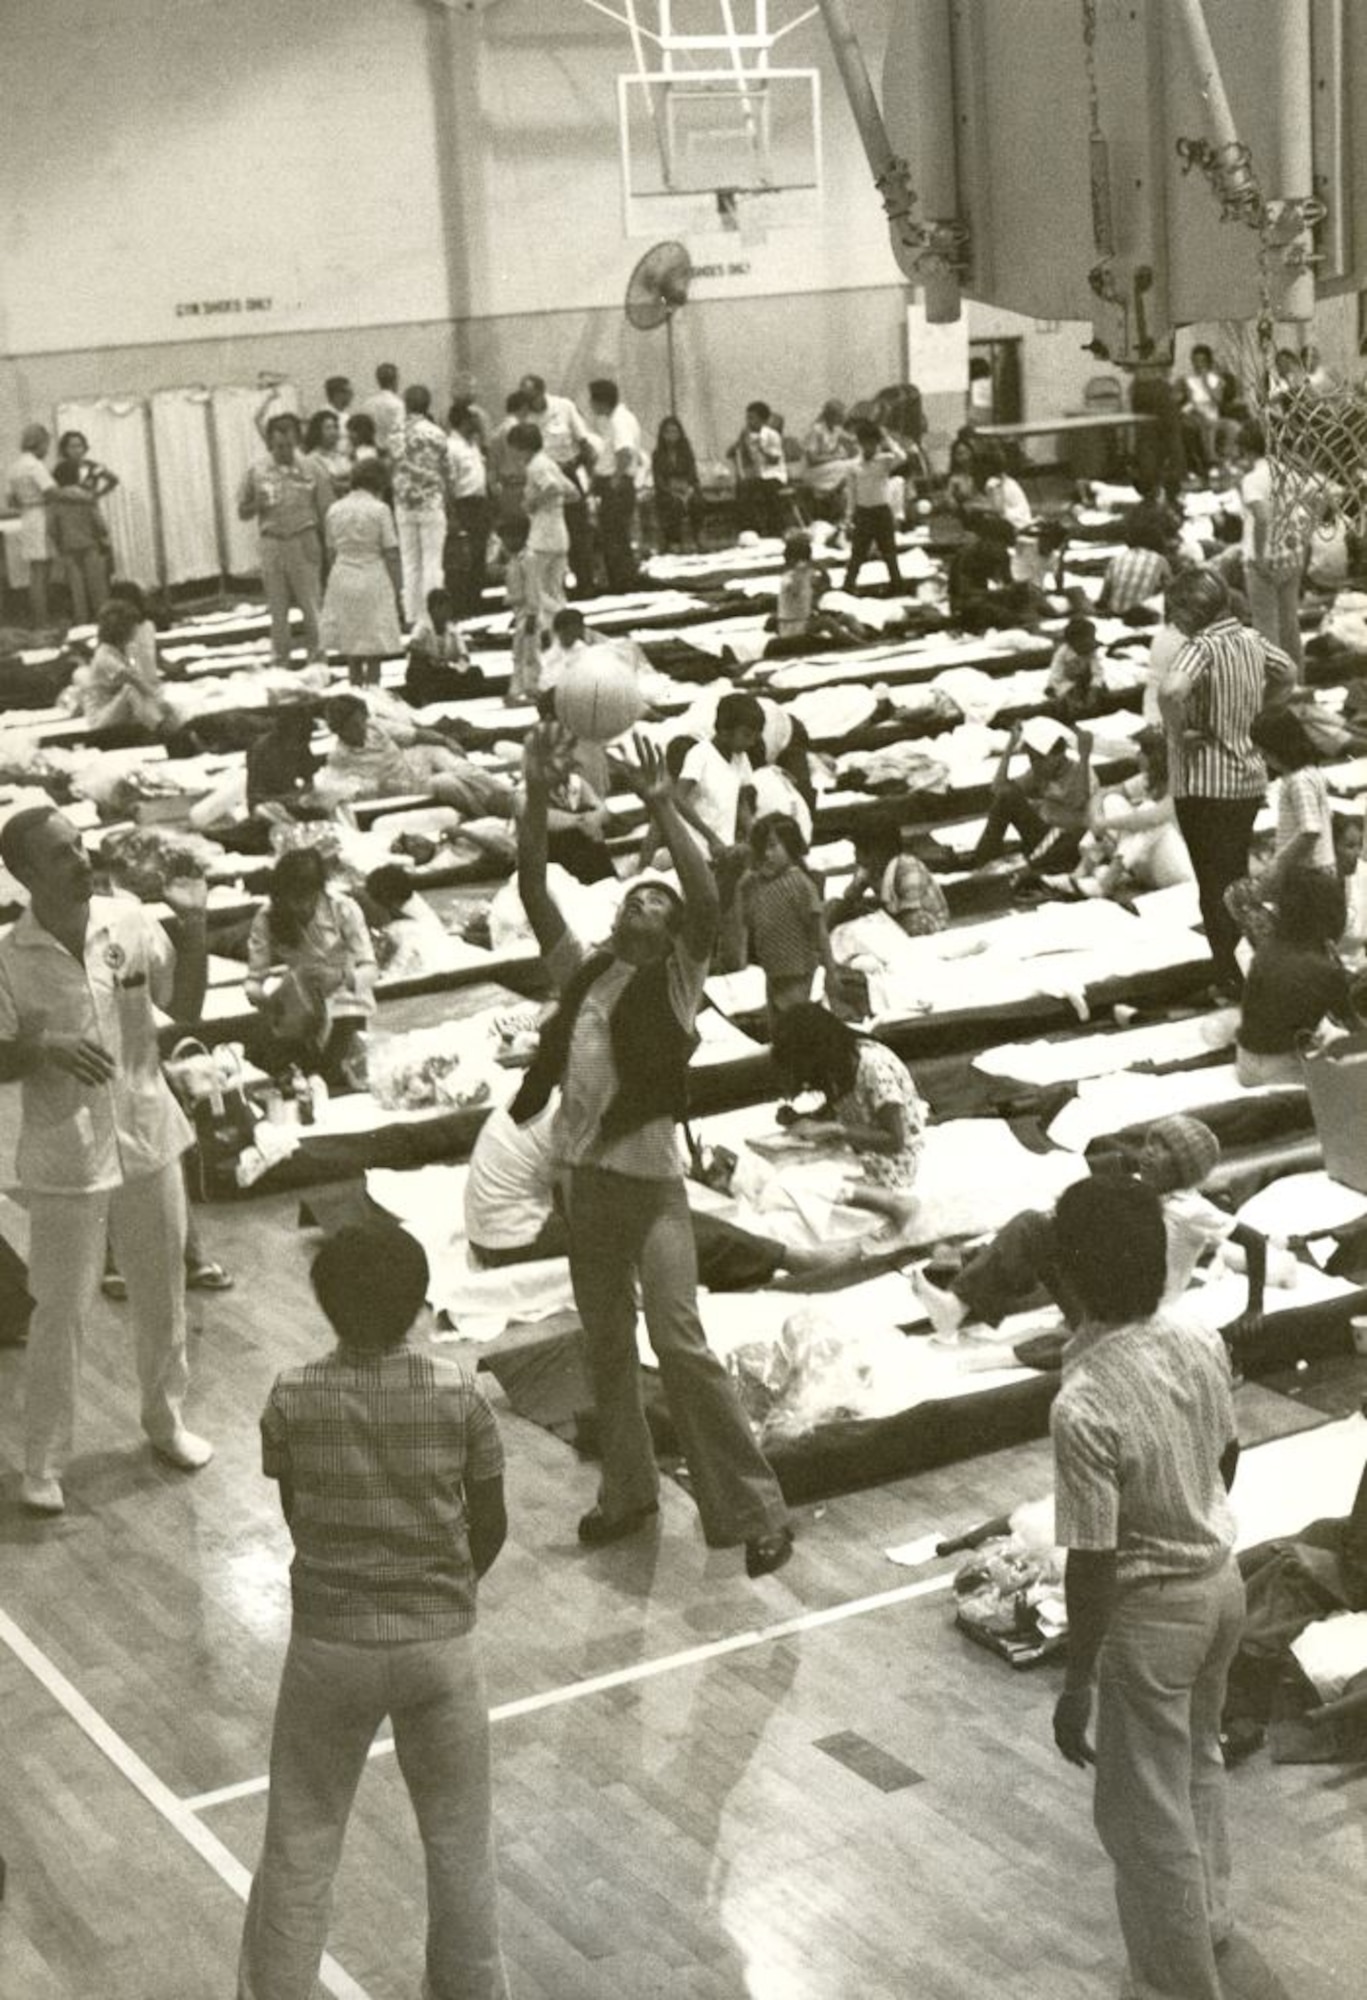 During Operation New Life,  to accommodate flights with longer layovers litters were set up on the Hickam Air Force Base, Hawaii,  gymnasium floor. The practice became common in late April and throughout May 1975 due to the increasing number of refugees. Operation New Life, ran from April 23 to November 1, 1975, airlifting over 100,000 evacuees and refugees from South Vietnam. (U.S. Air Force photo provided by 15 WG historian office)